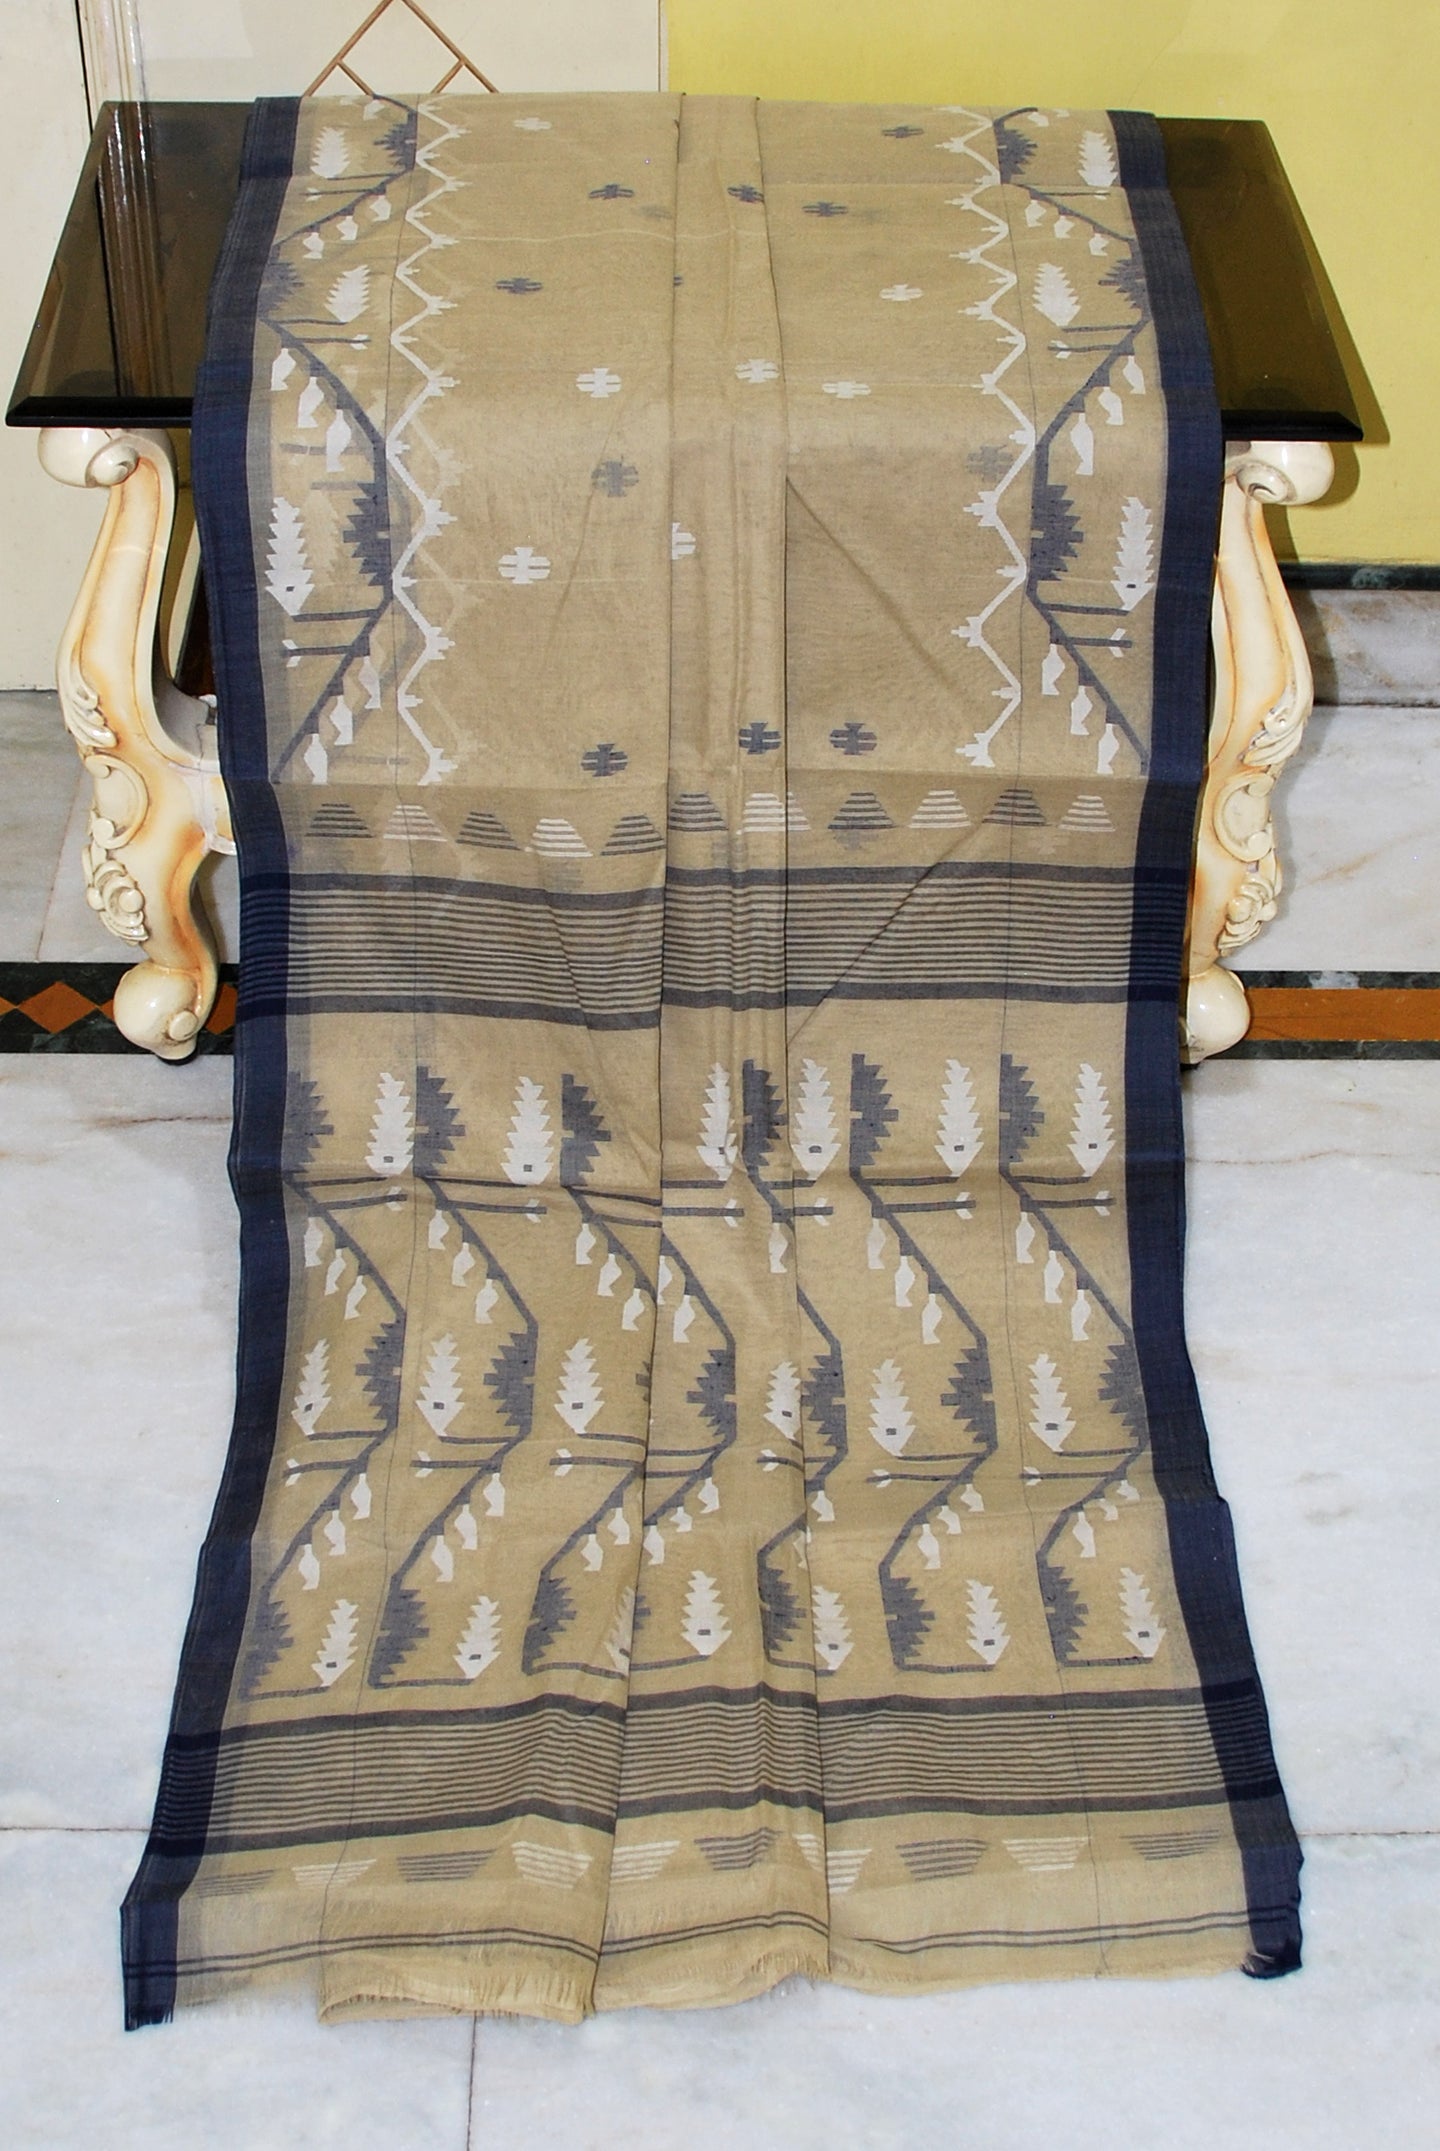 Hand Karat Needle Woven Work Pure Cotton Bengal Jamdani Saree in Beige and Off White with Black Selvage